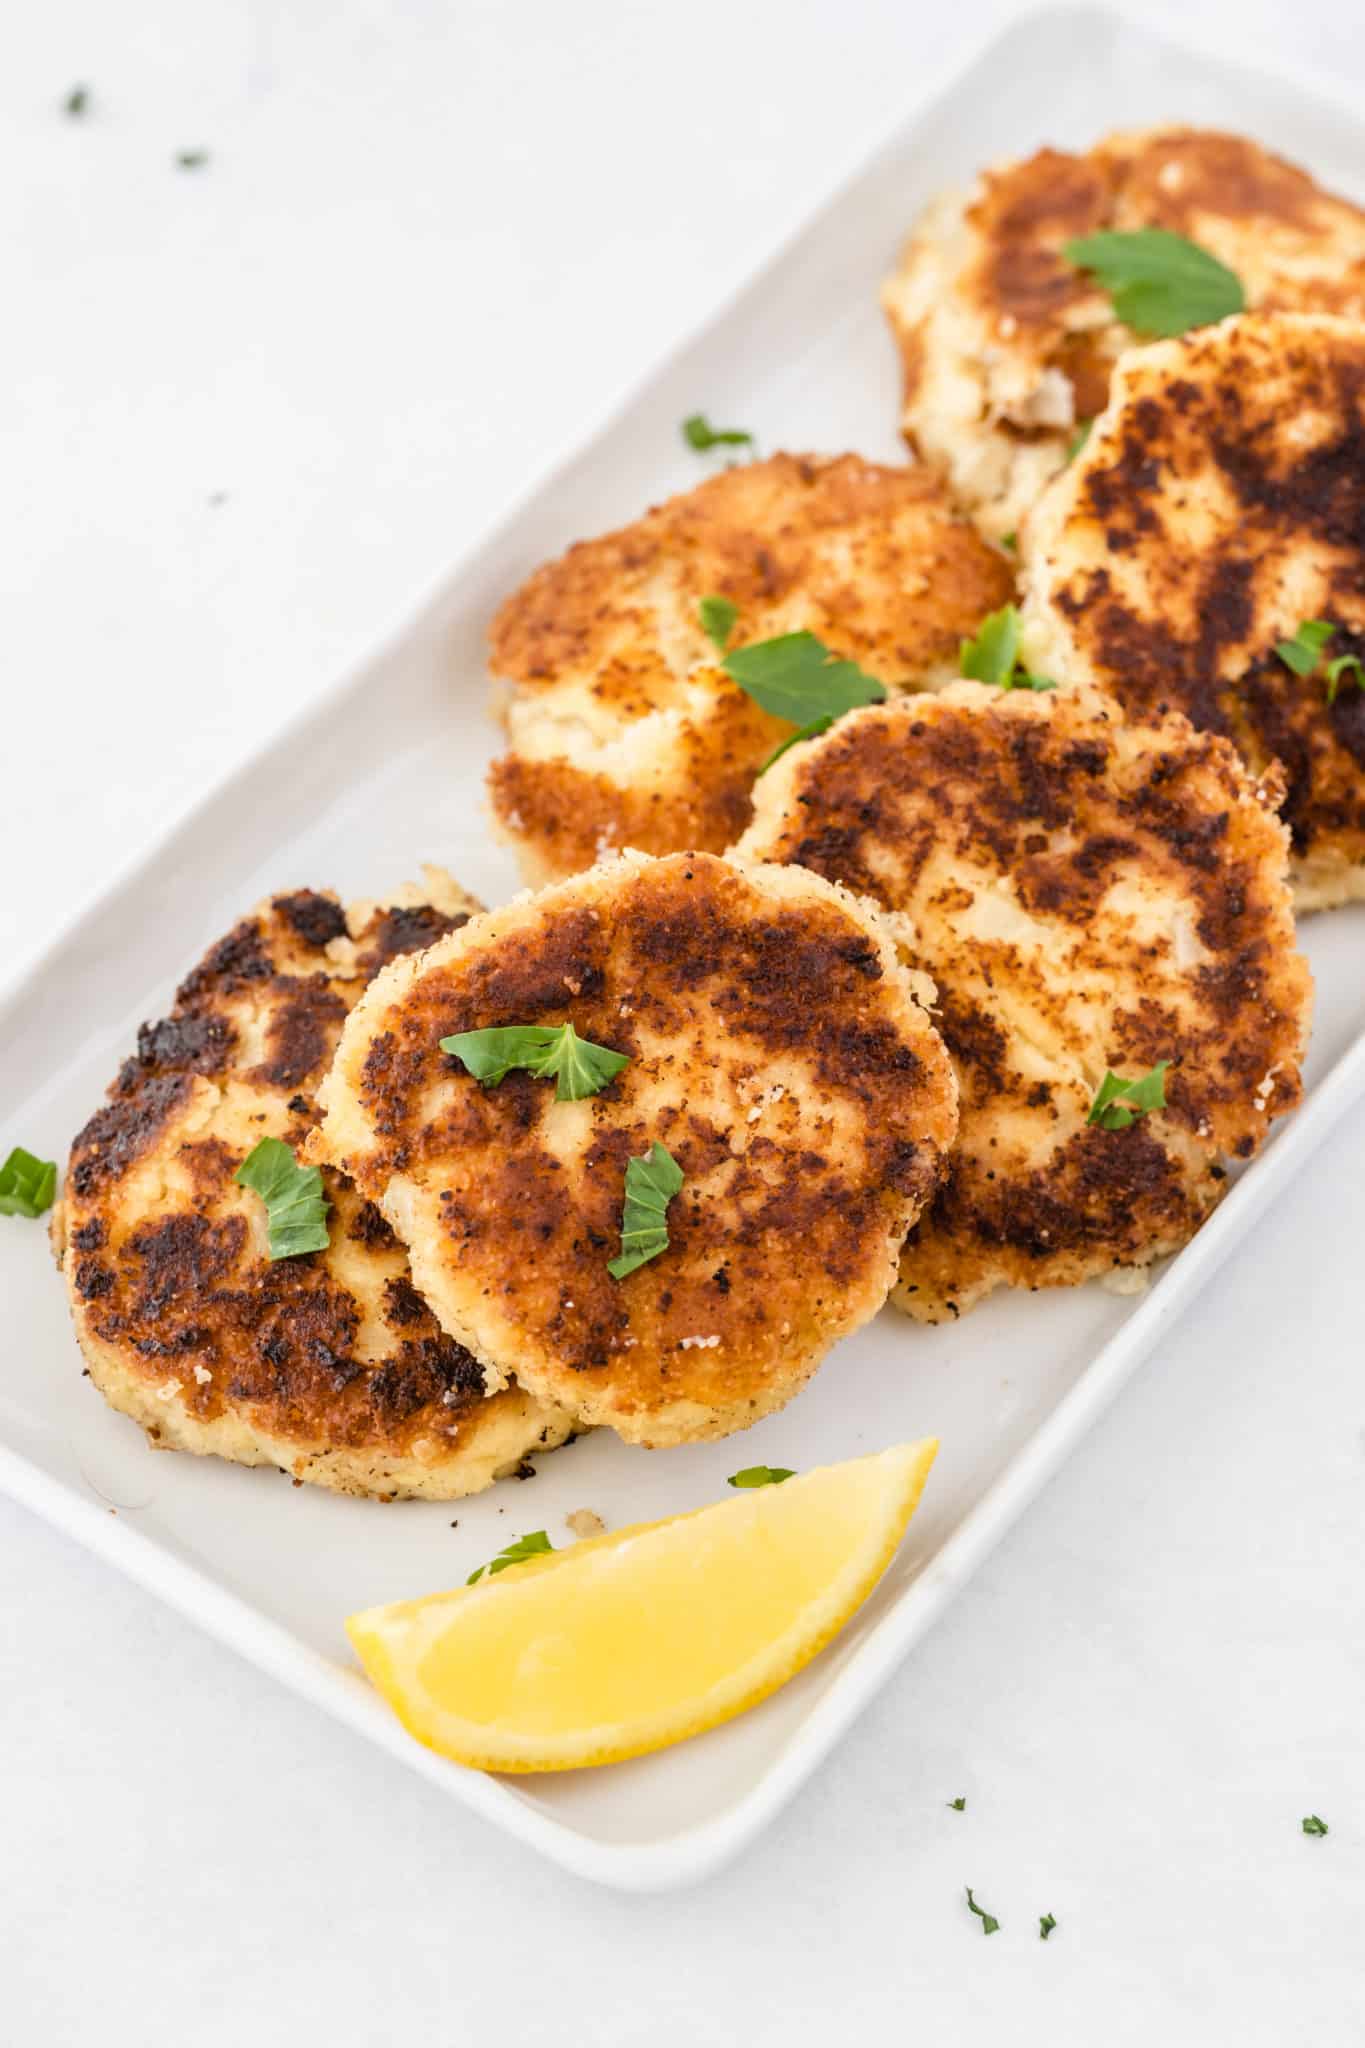 homemade gluten-free whole30 crab cakes cooked and served on a white platter.